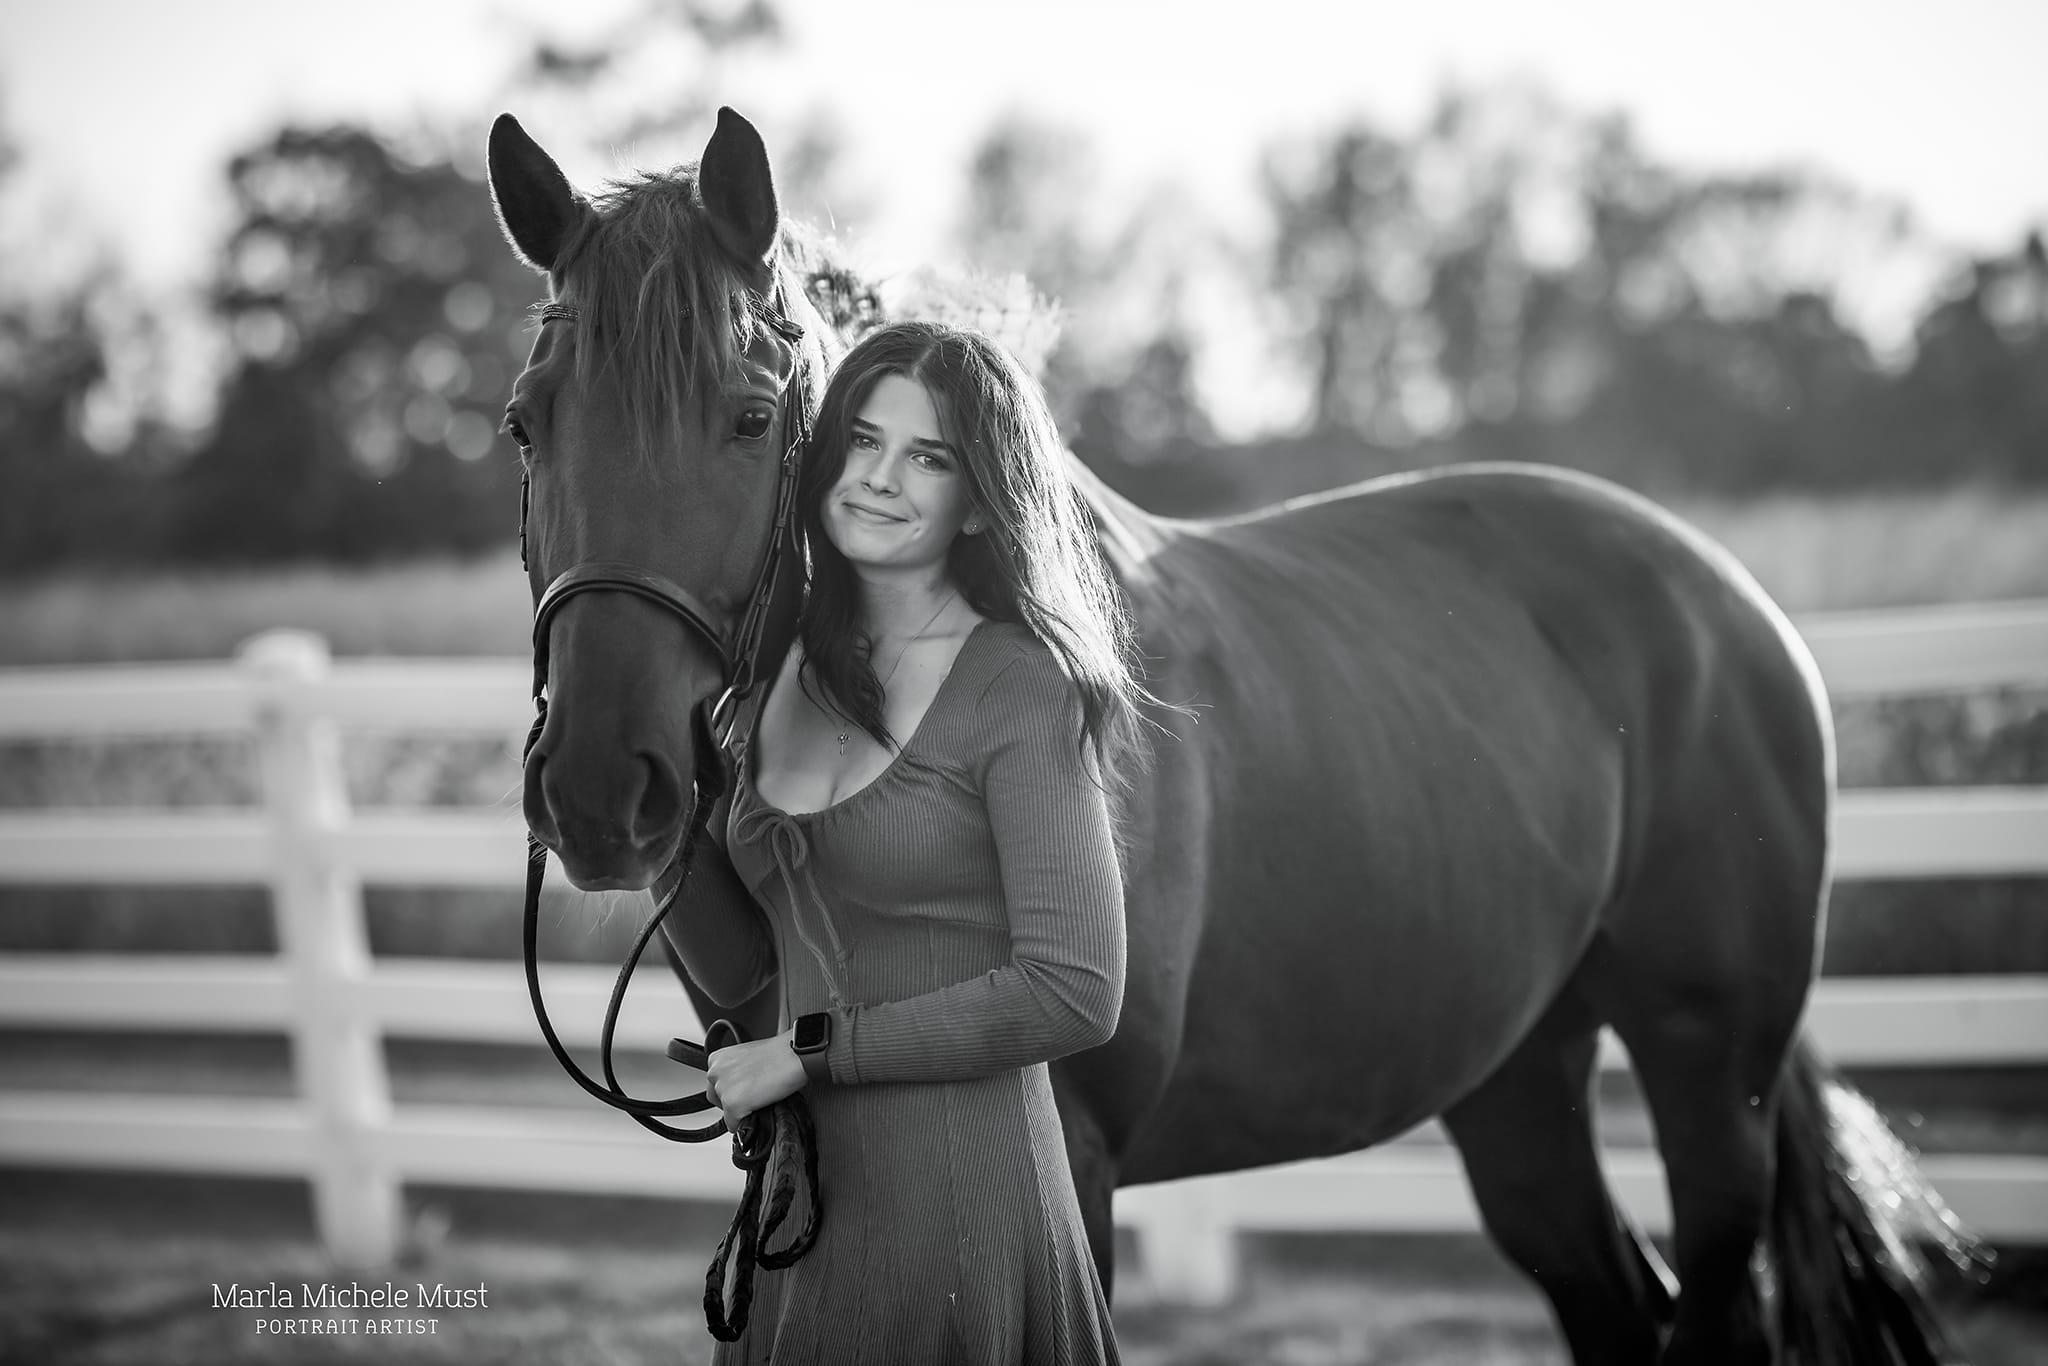 A memorable black and white photograph by a Detroit equine photographer, illustrating the heartwarming bond between a horse and rider standing proudly next to each other as she hold the reigns and smiles.